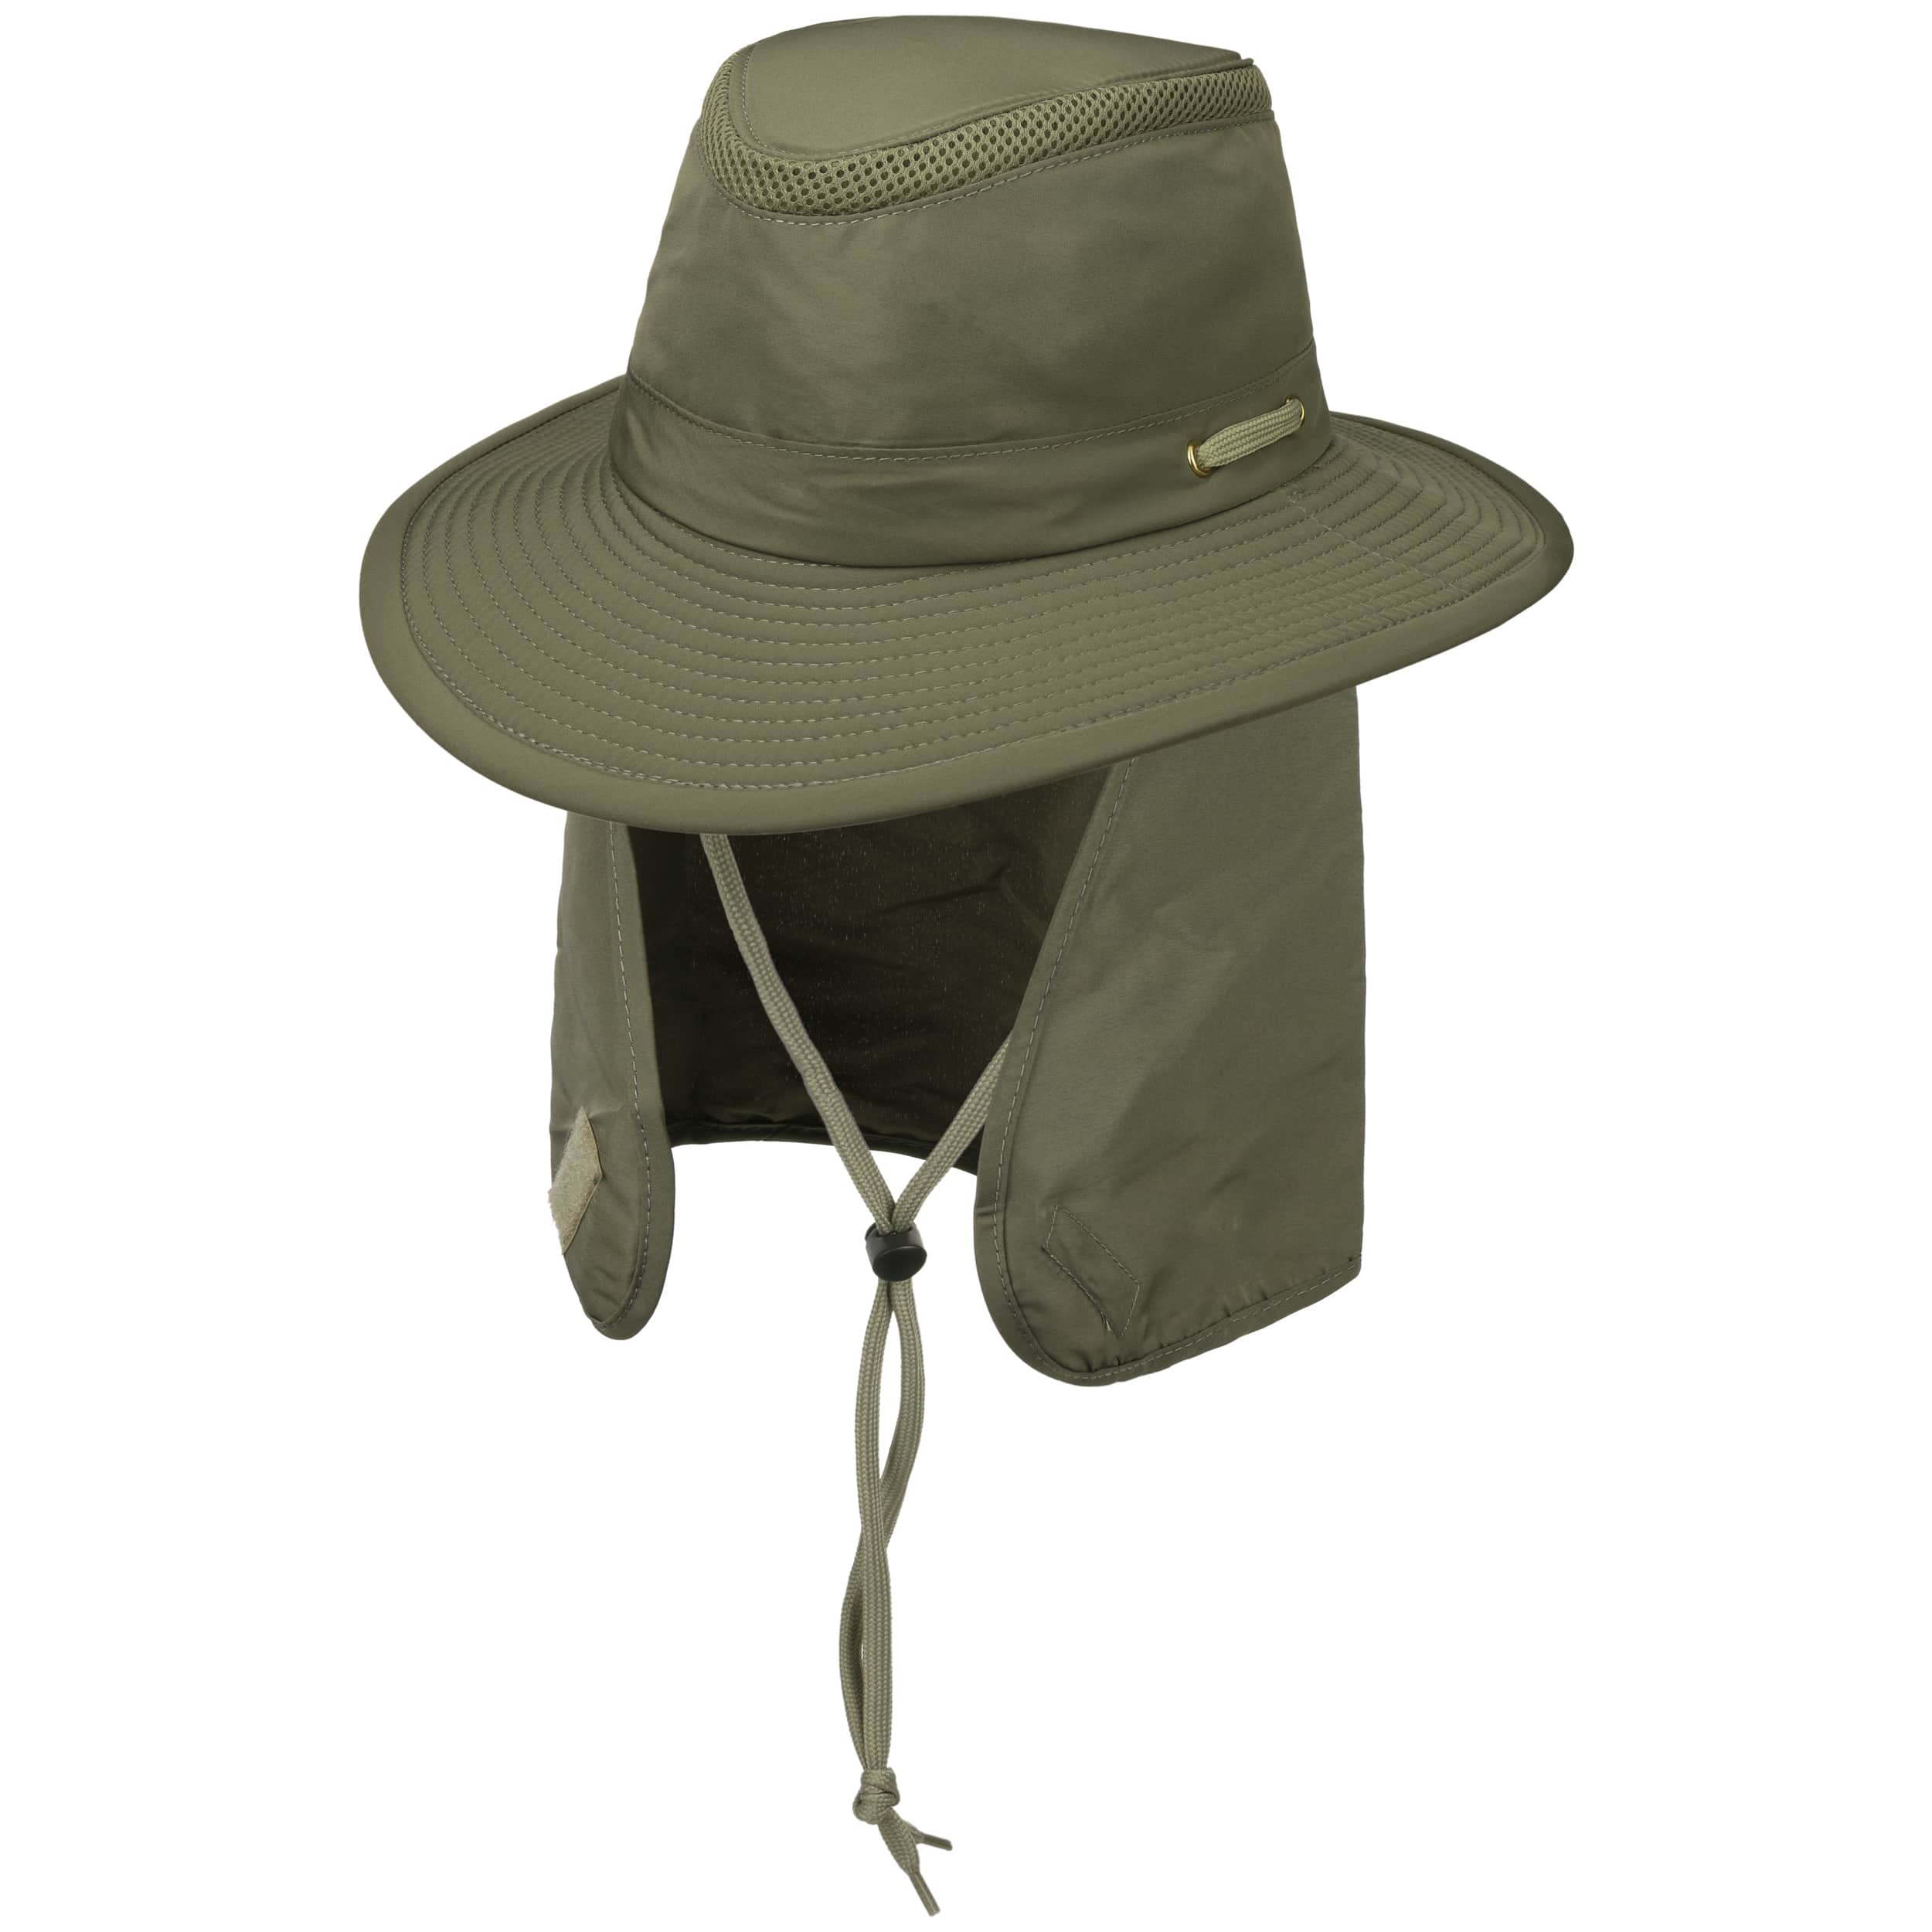 Outdoor Hat With Neck Protection by Conner - Olive - Female - Size: M (56-57 cm)